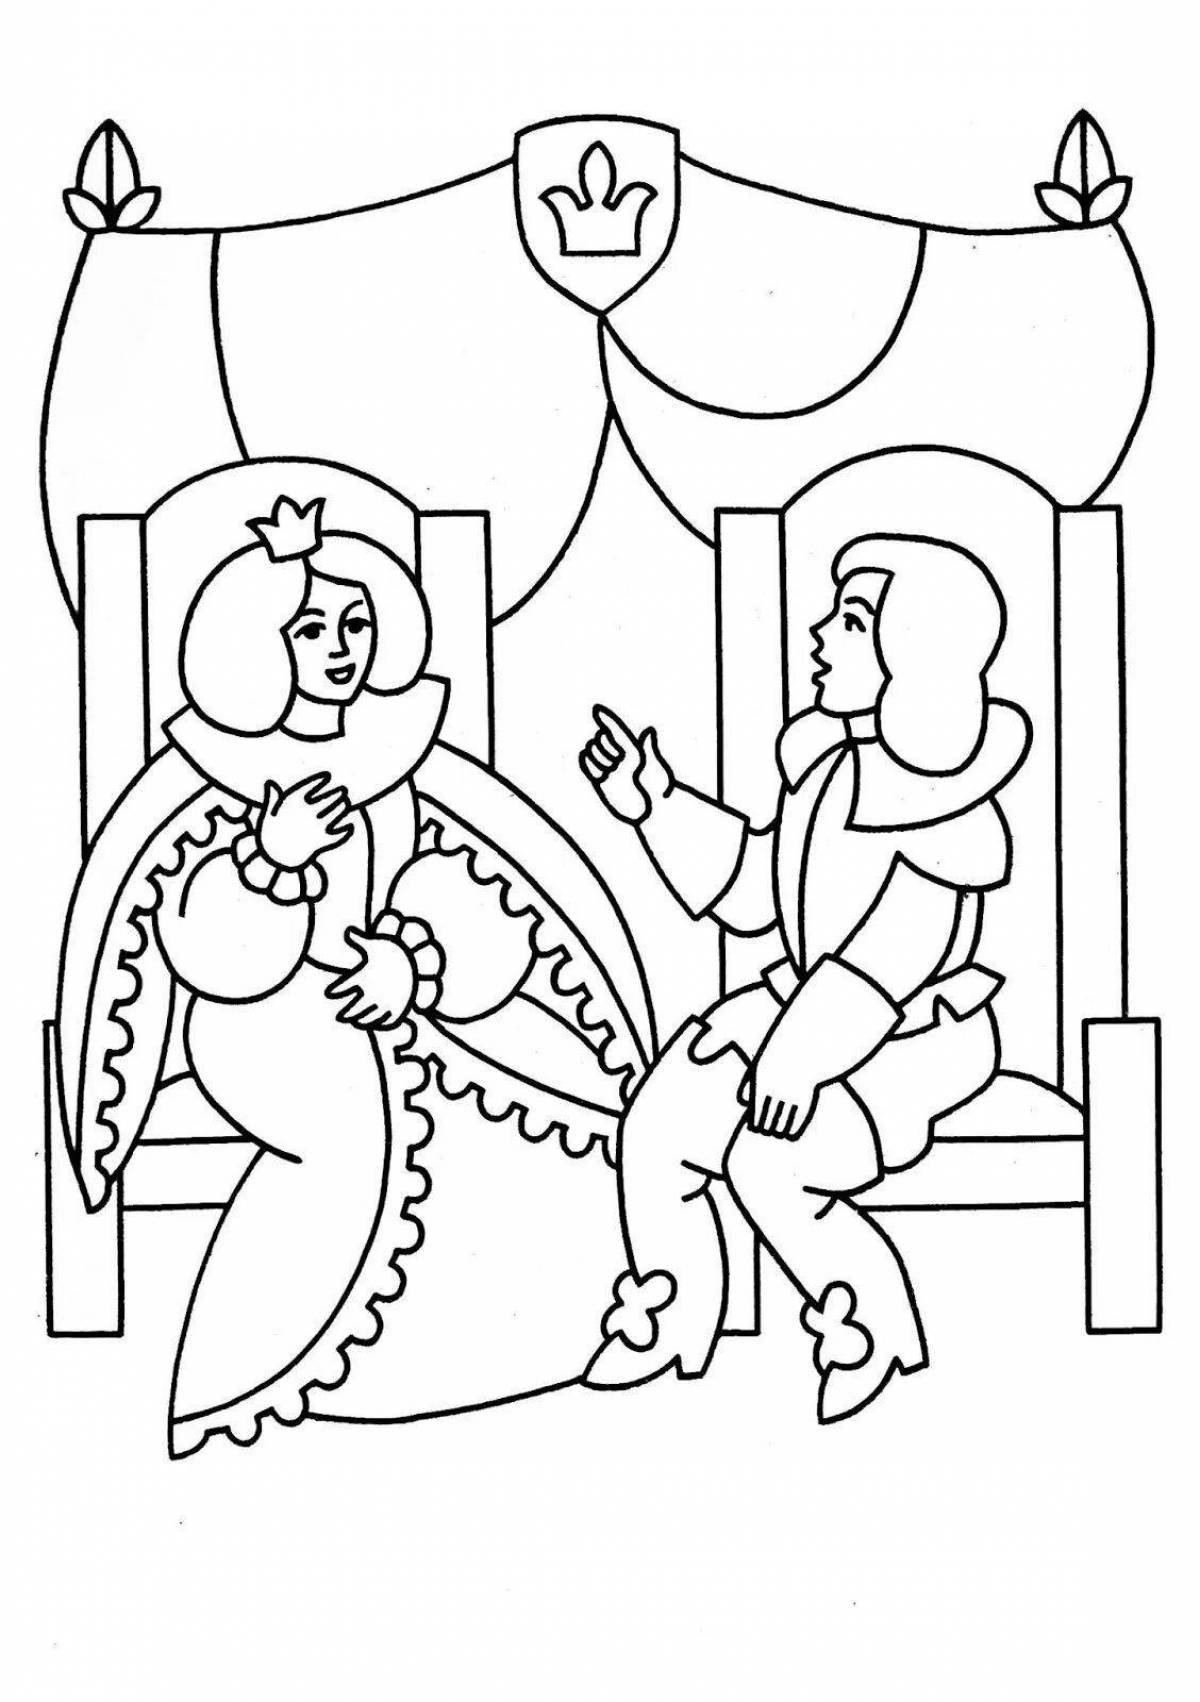 Sh perro colorful coloring page